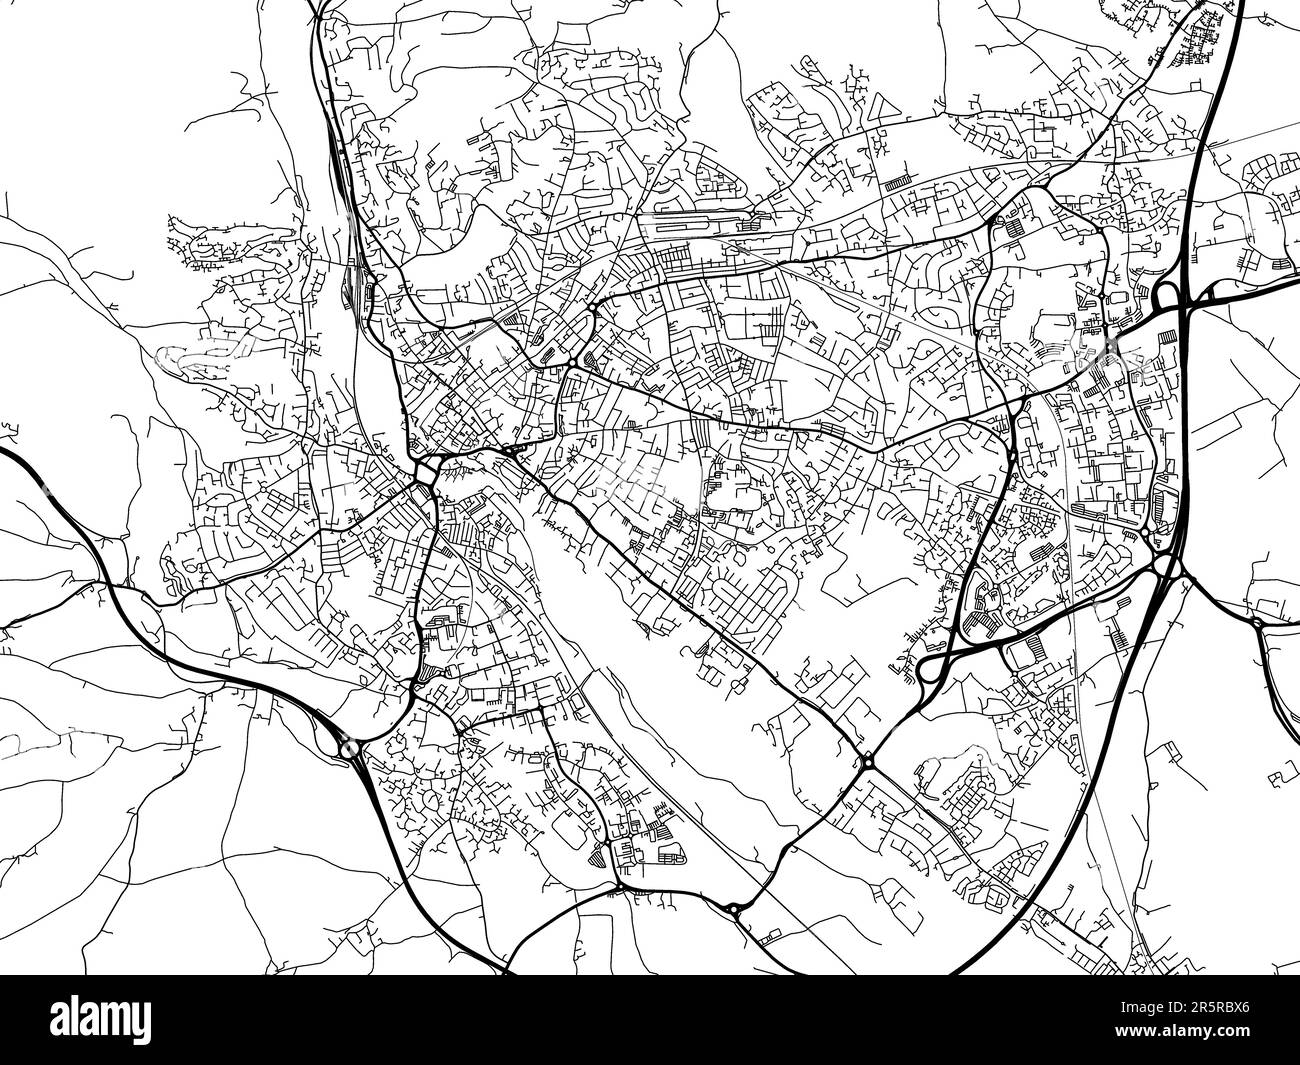 Road map of the city of  Exeter in the United Kingdom on a white background. Stock Photo